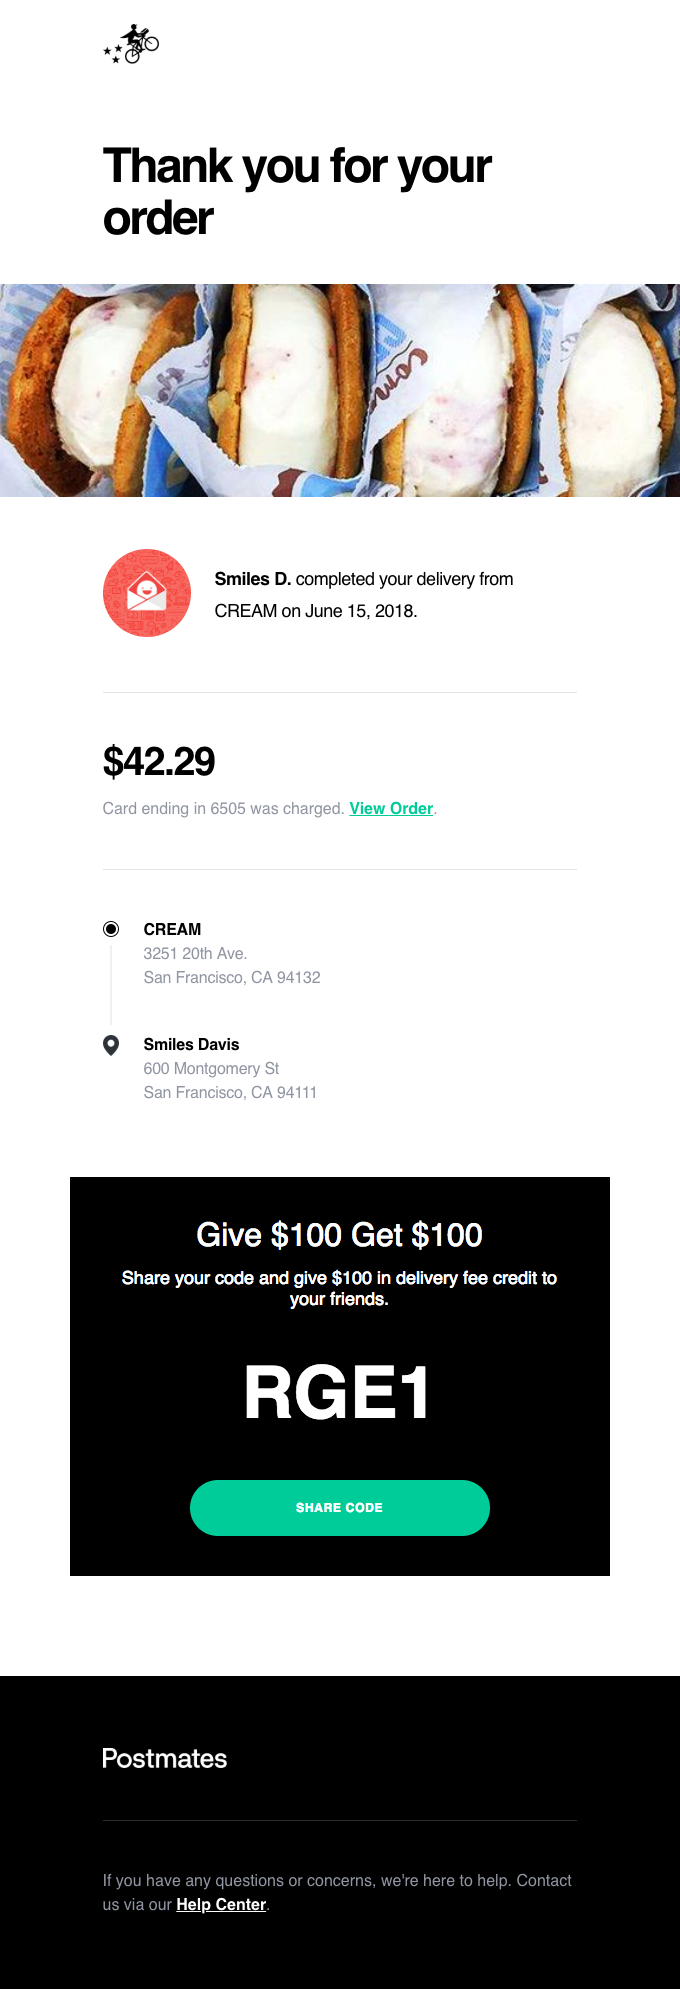 Thank you for ordering from CREAM (June 15, 2018)